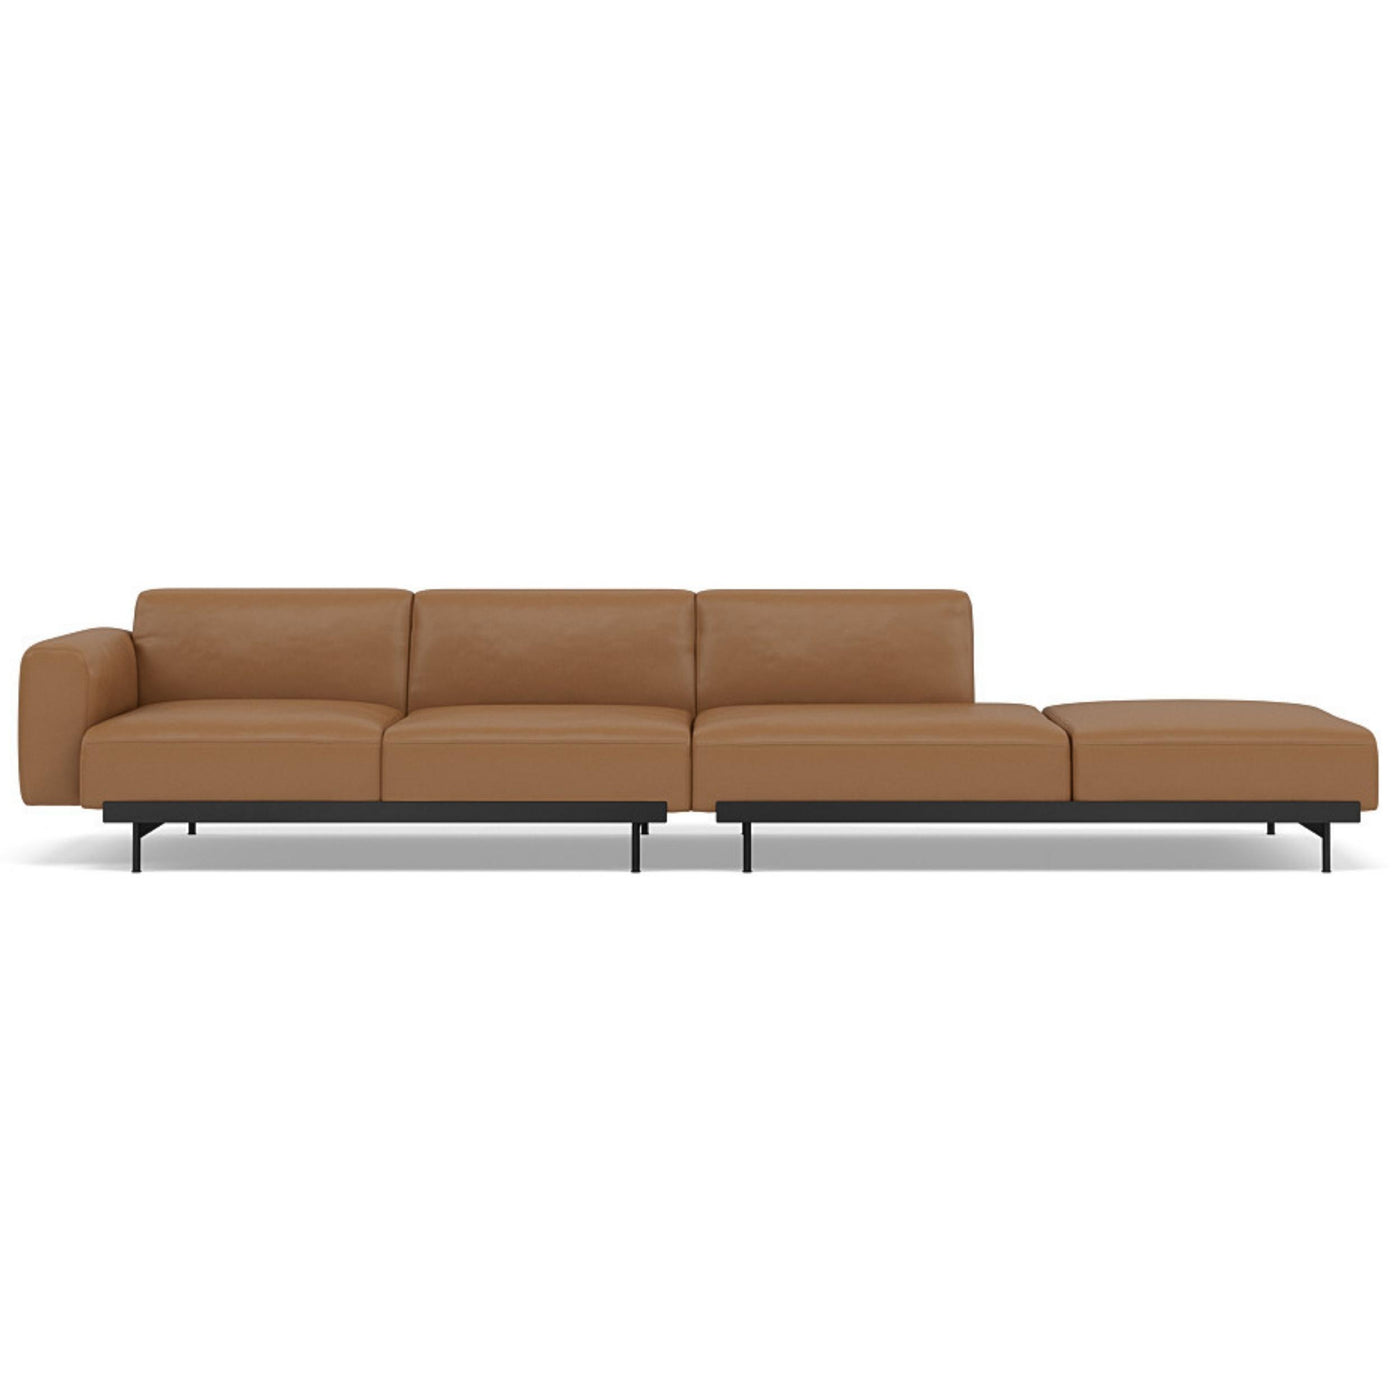 Muuto In Situ Modular 4 Seater Sofa configuration 2. Made to order from someday designs. #colour_cognac-refine-leather